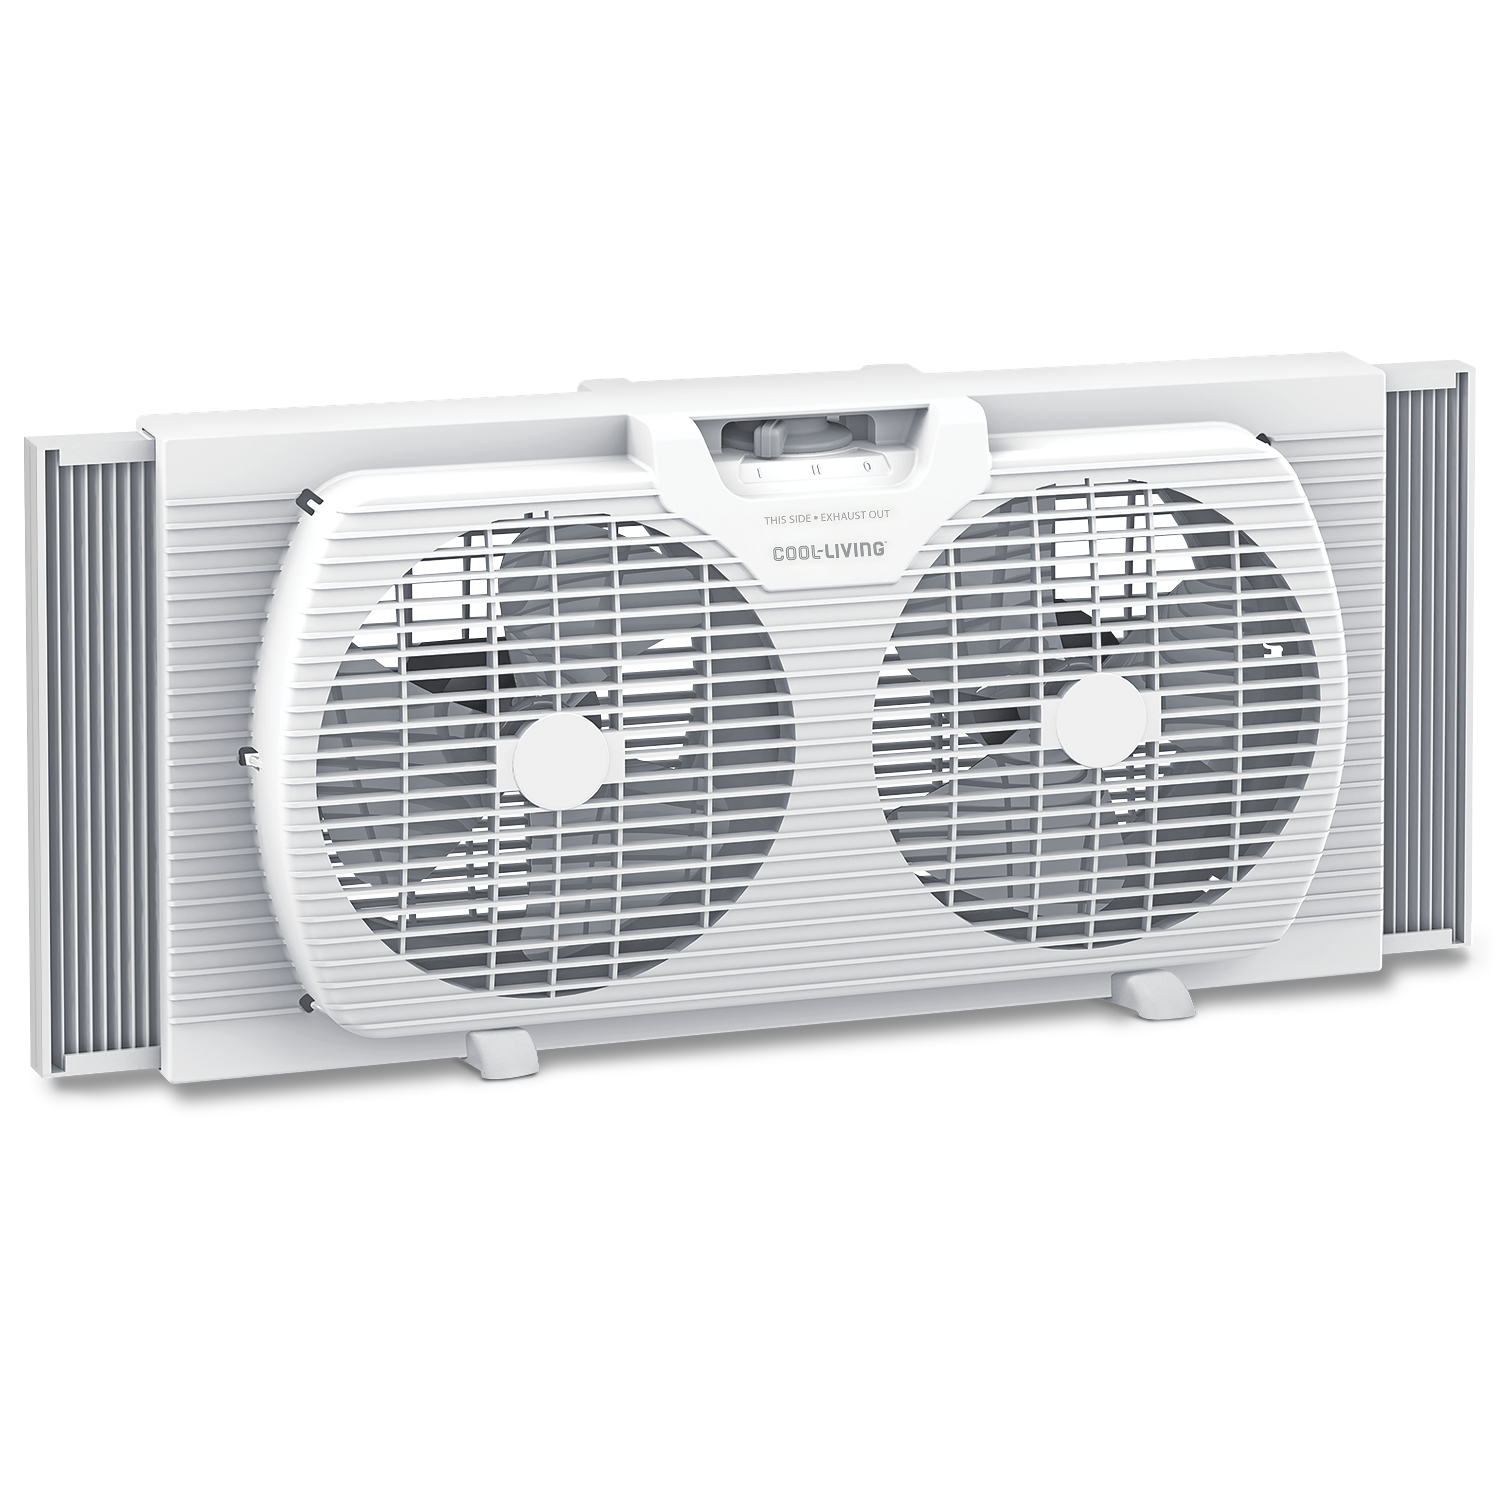 9" Twin Window Fan with Reversible Airflow Control, Auto-Locking Expanders, Convenient Carry Handle and 2-Speed Fan Switch, Ideal for Home, Kitchen, Bedroom & Office